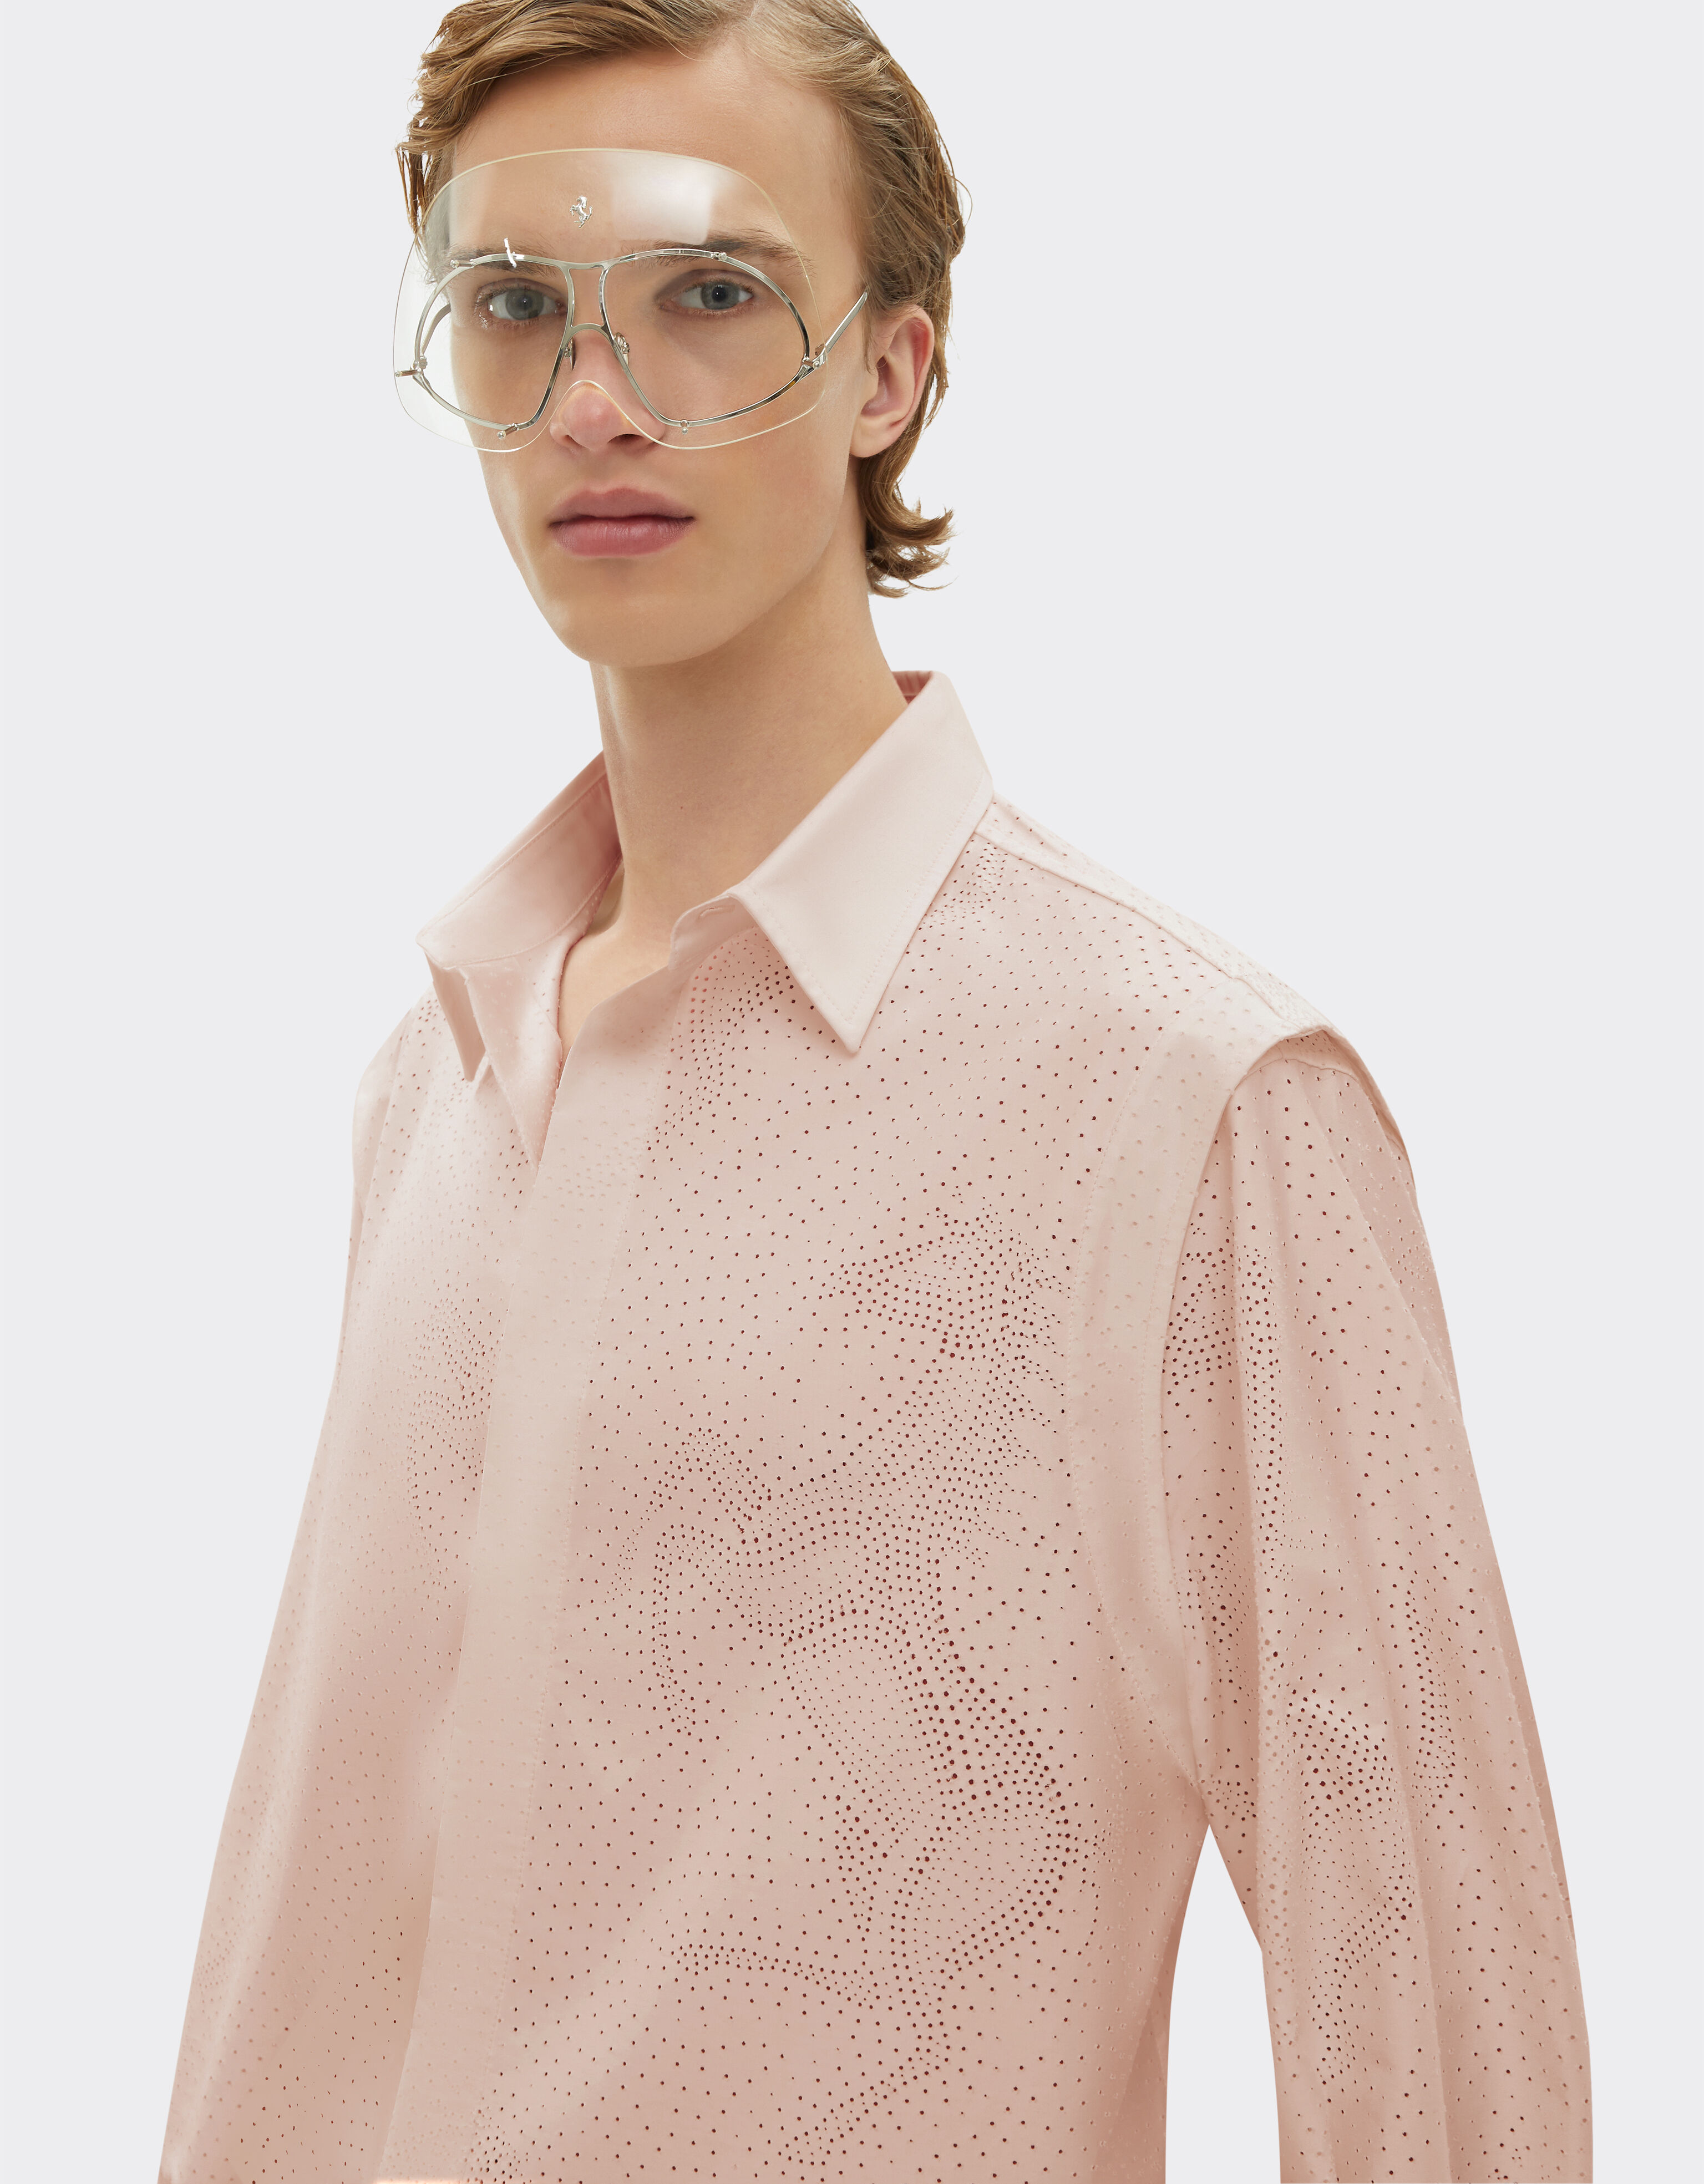 Ferrari Shirt with Prancing Horse perforated pattern Nude 20743f